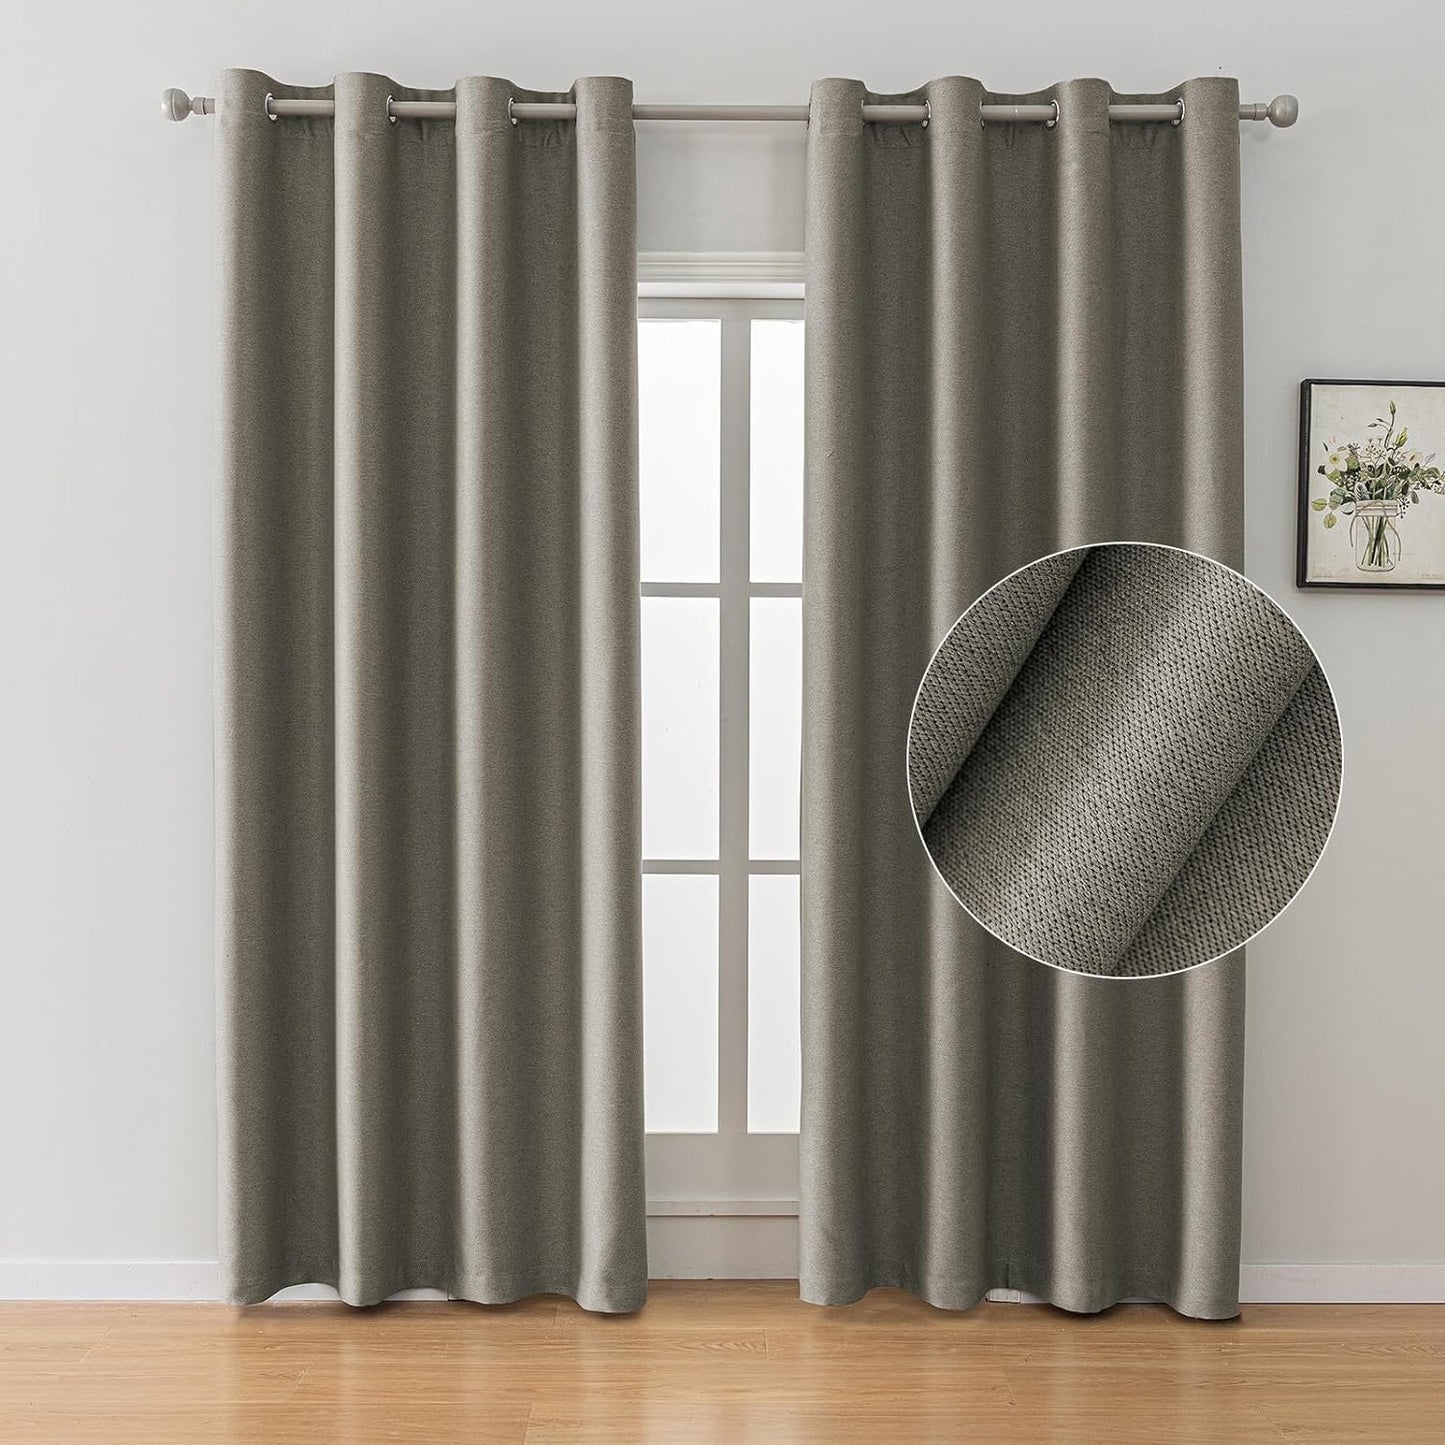 SYSLOON Natural Linen Curtains 72 Inch Length 2 Panels Set,Blackout Curtains for Bedroom Grommet,Thermal Insulated Room Darkening Curtains for Living Room,Long Drapes 42"X72",Beige  SYSLOON Linen 52X96In （W X L） 